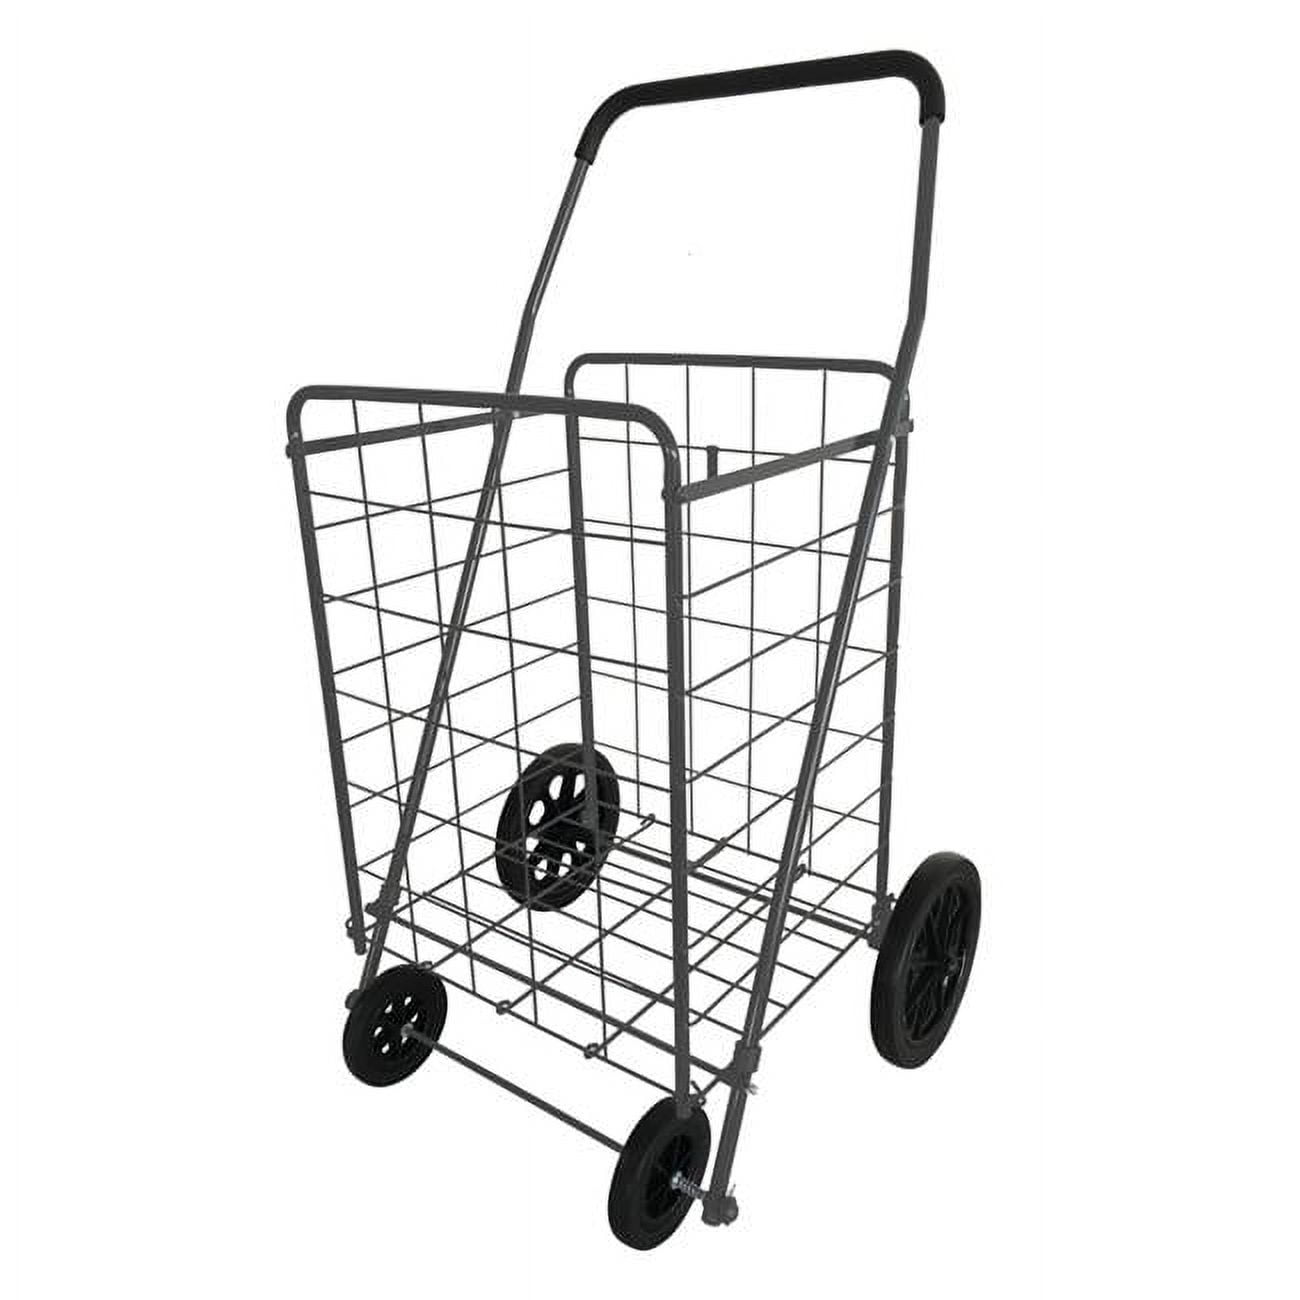 Homecare Products 40.6 x 21.7 x 24.4 in. Gray Collapsible Shopping Cart